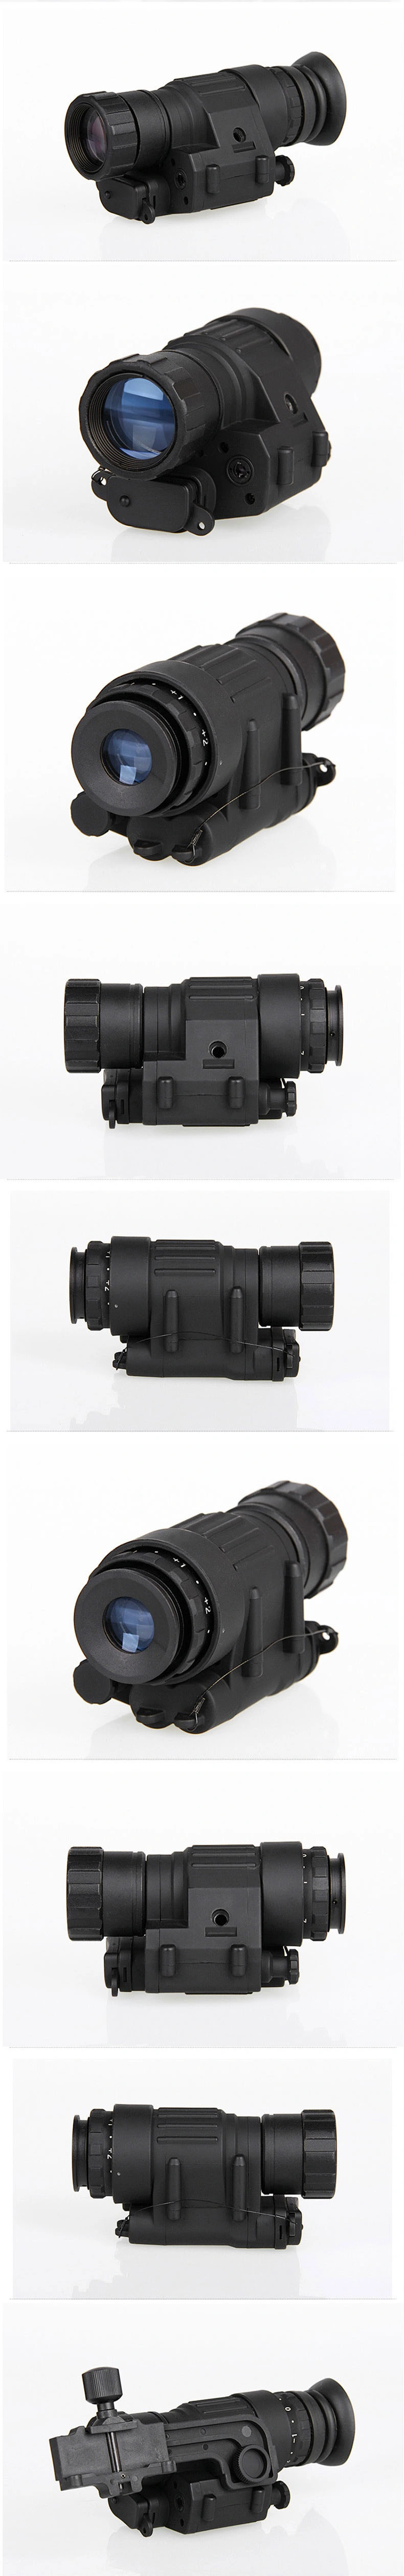 High Quality, Clear and Widely Used Nightvision Monocular Monocular Scope Night Vision